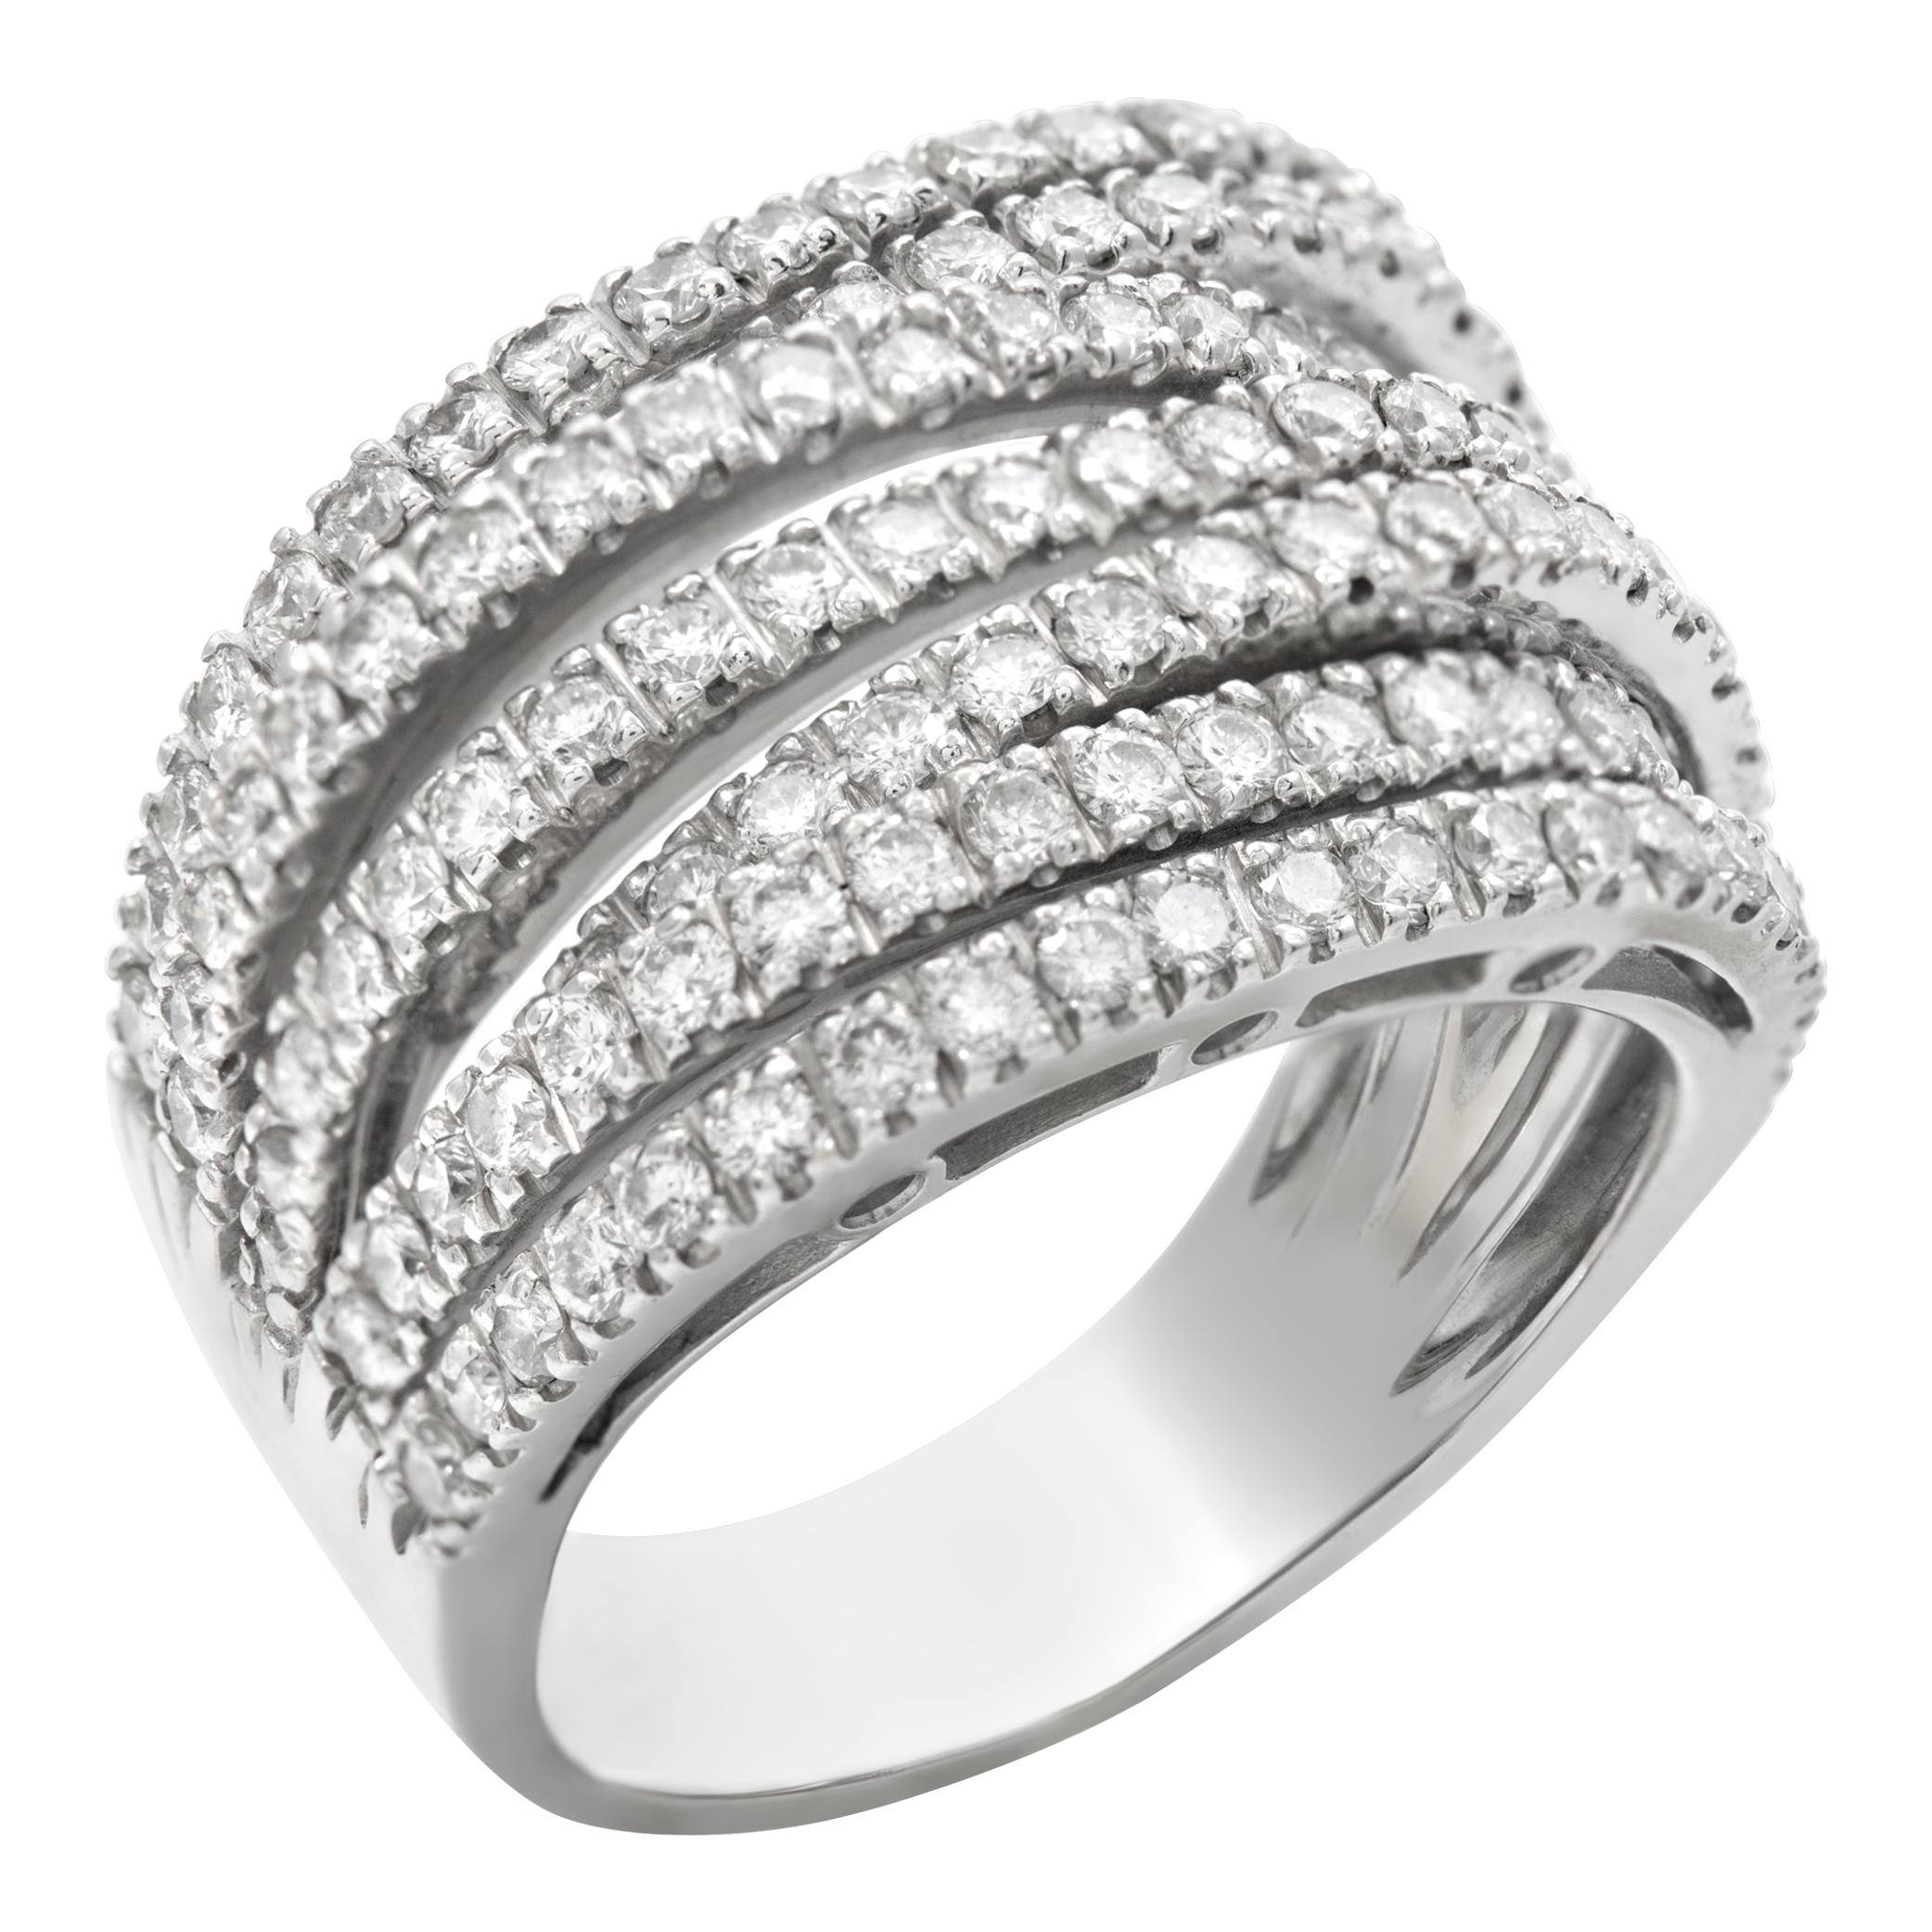 Wide seven rows diamonds ring in 18K white gold. Round brilliant cut diamond total approx. weight: 2.00 carats, estimate: G-H color, VS-SI clarity. Size 7.5This Diamond ring is currently size 7.5 and some items can be sized up or down, please ask!